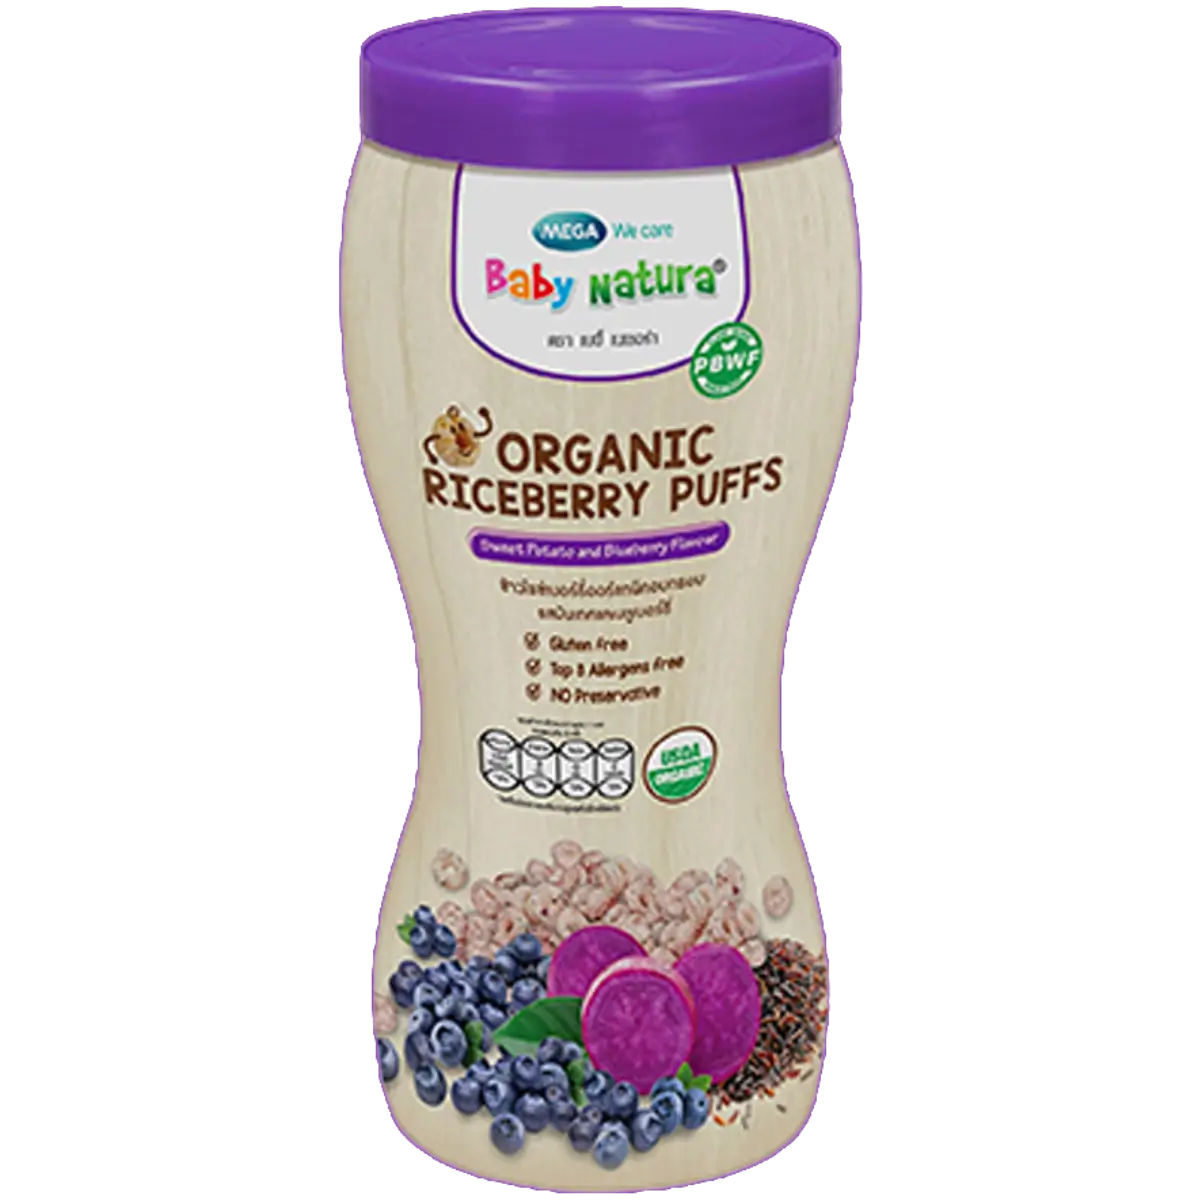 Organic Riceberry Puffs Sweet Potato and Blueberry flavour